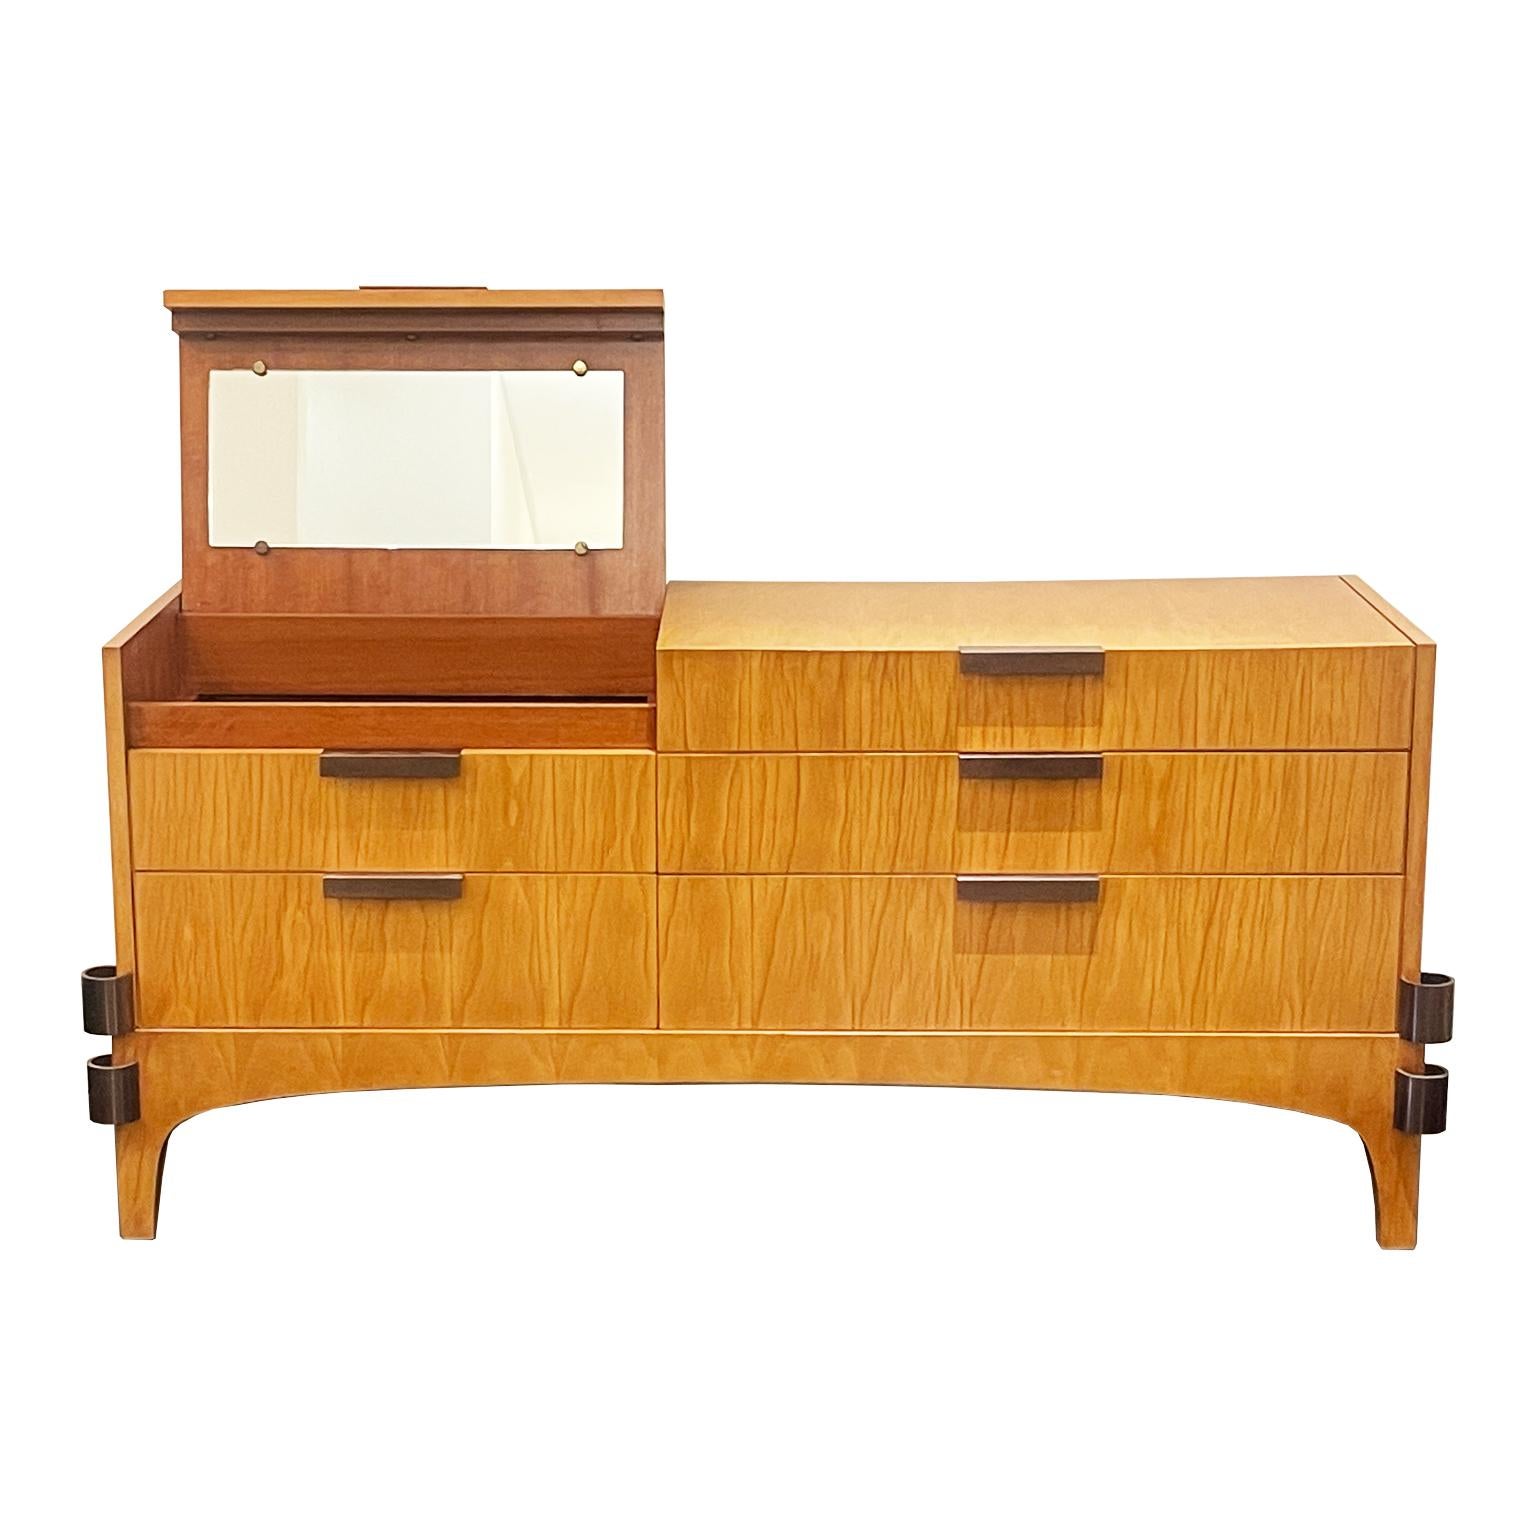 This unique Italian Mid-Century Sideboard is crafted in fir wood. This sideboard features five sleek drawers with the sixth drawer housing a hidden bar compartment with a mirror. The original handles are in an antique brass finish along with the